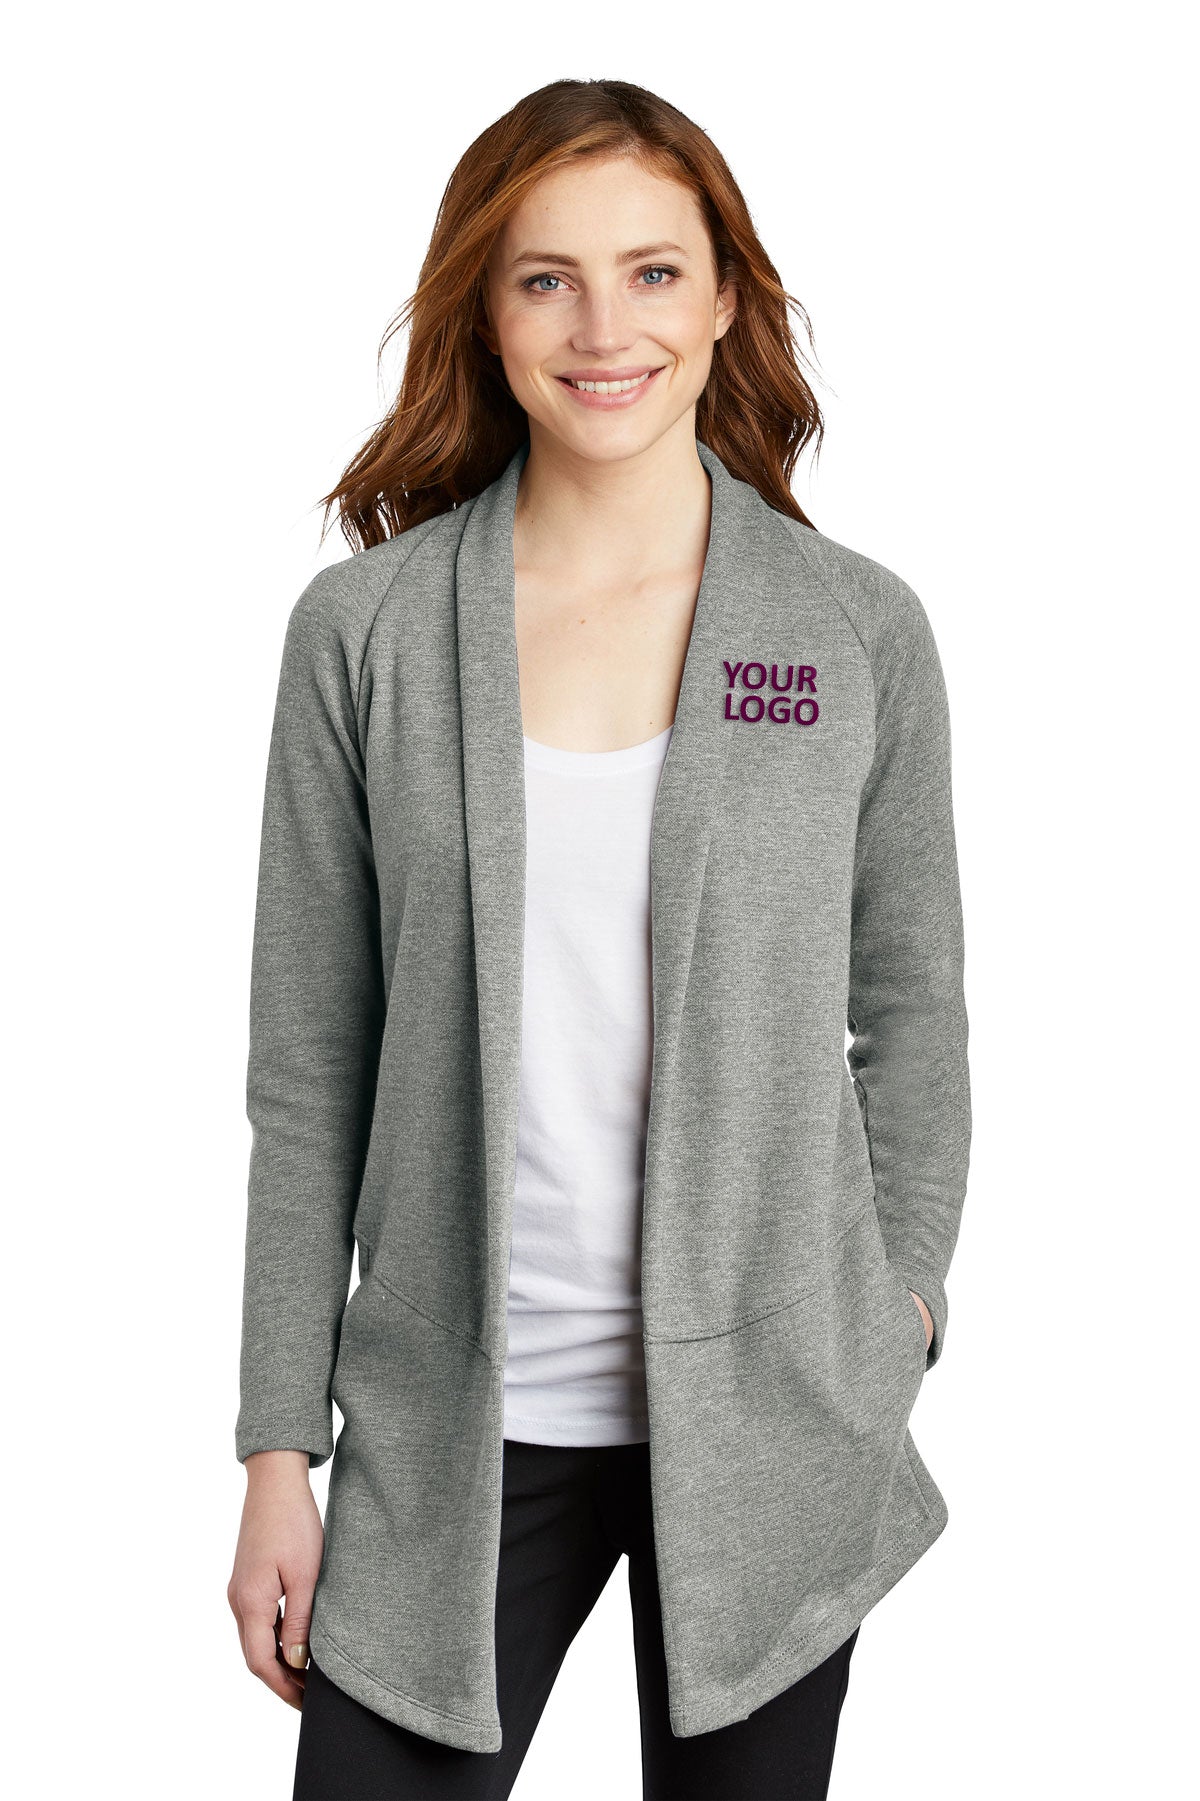 port authority medium heather grey/ charcoal heather l807 printed sweatshirts for business